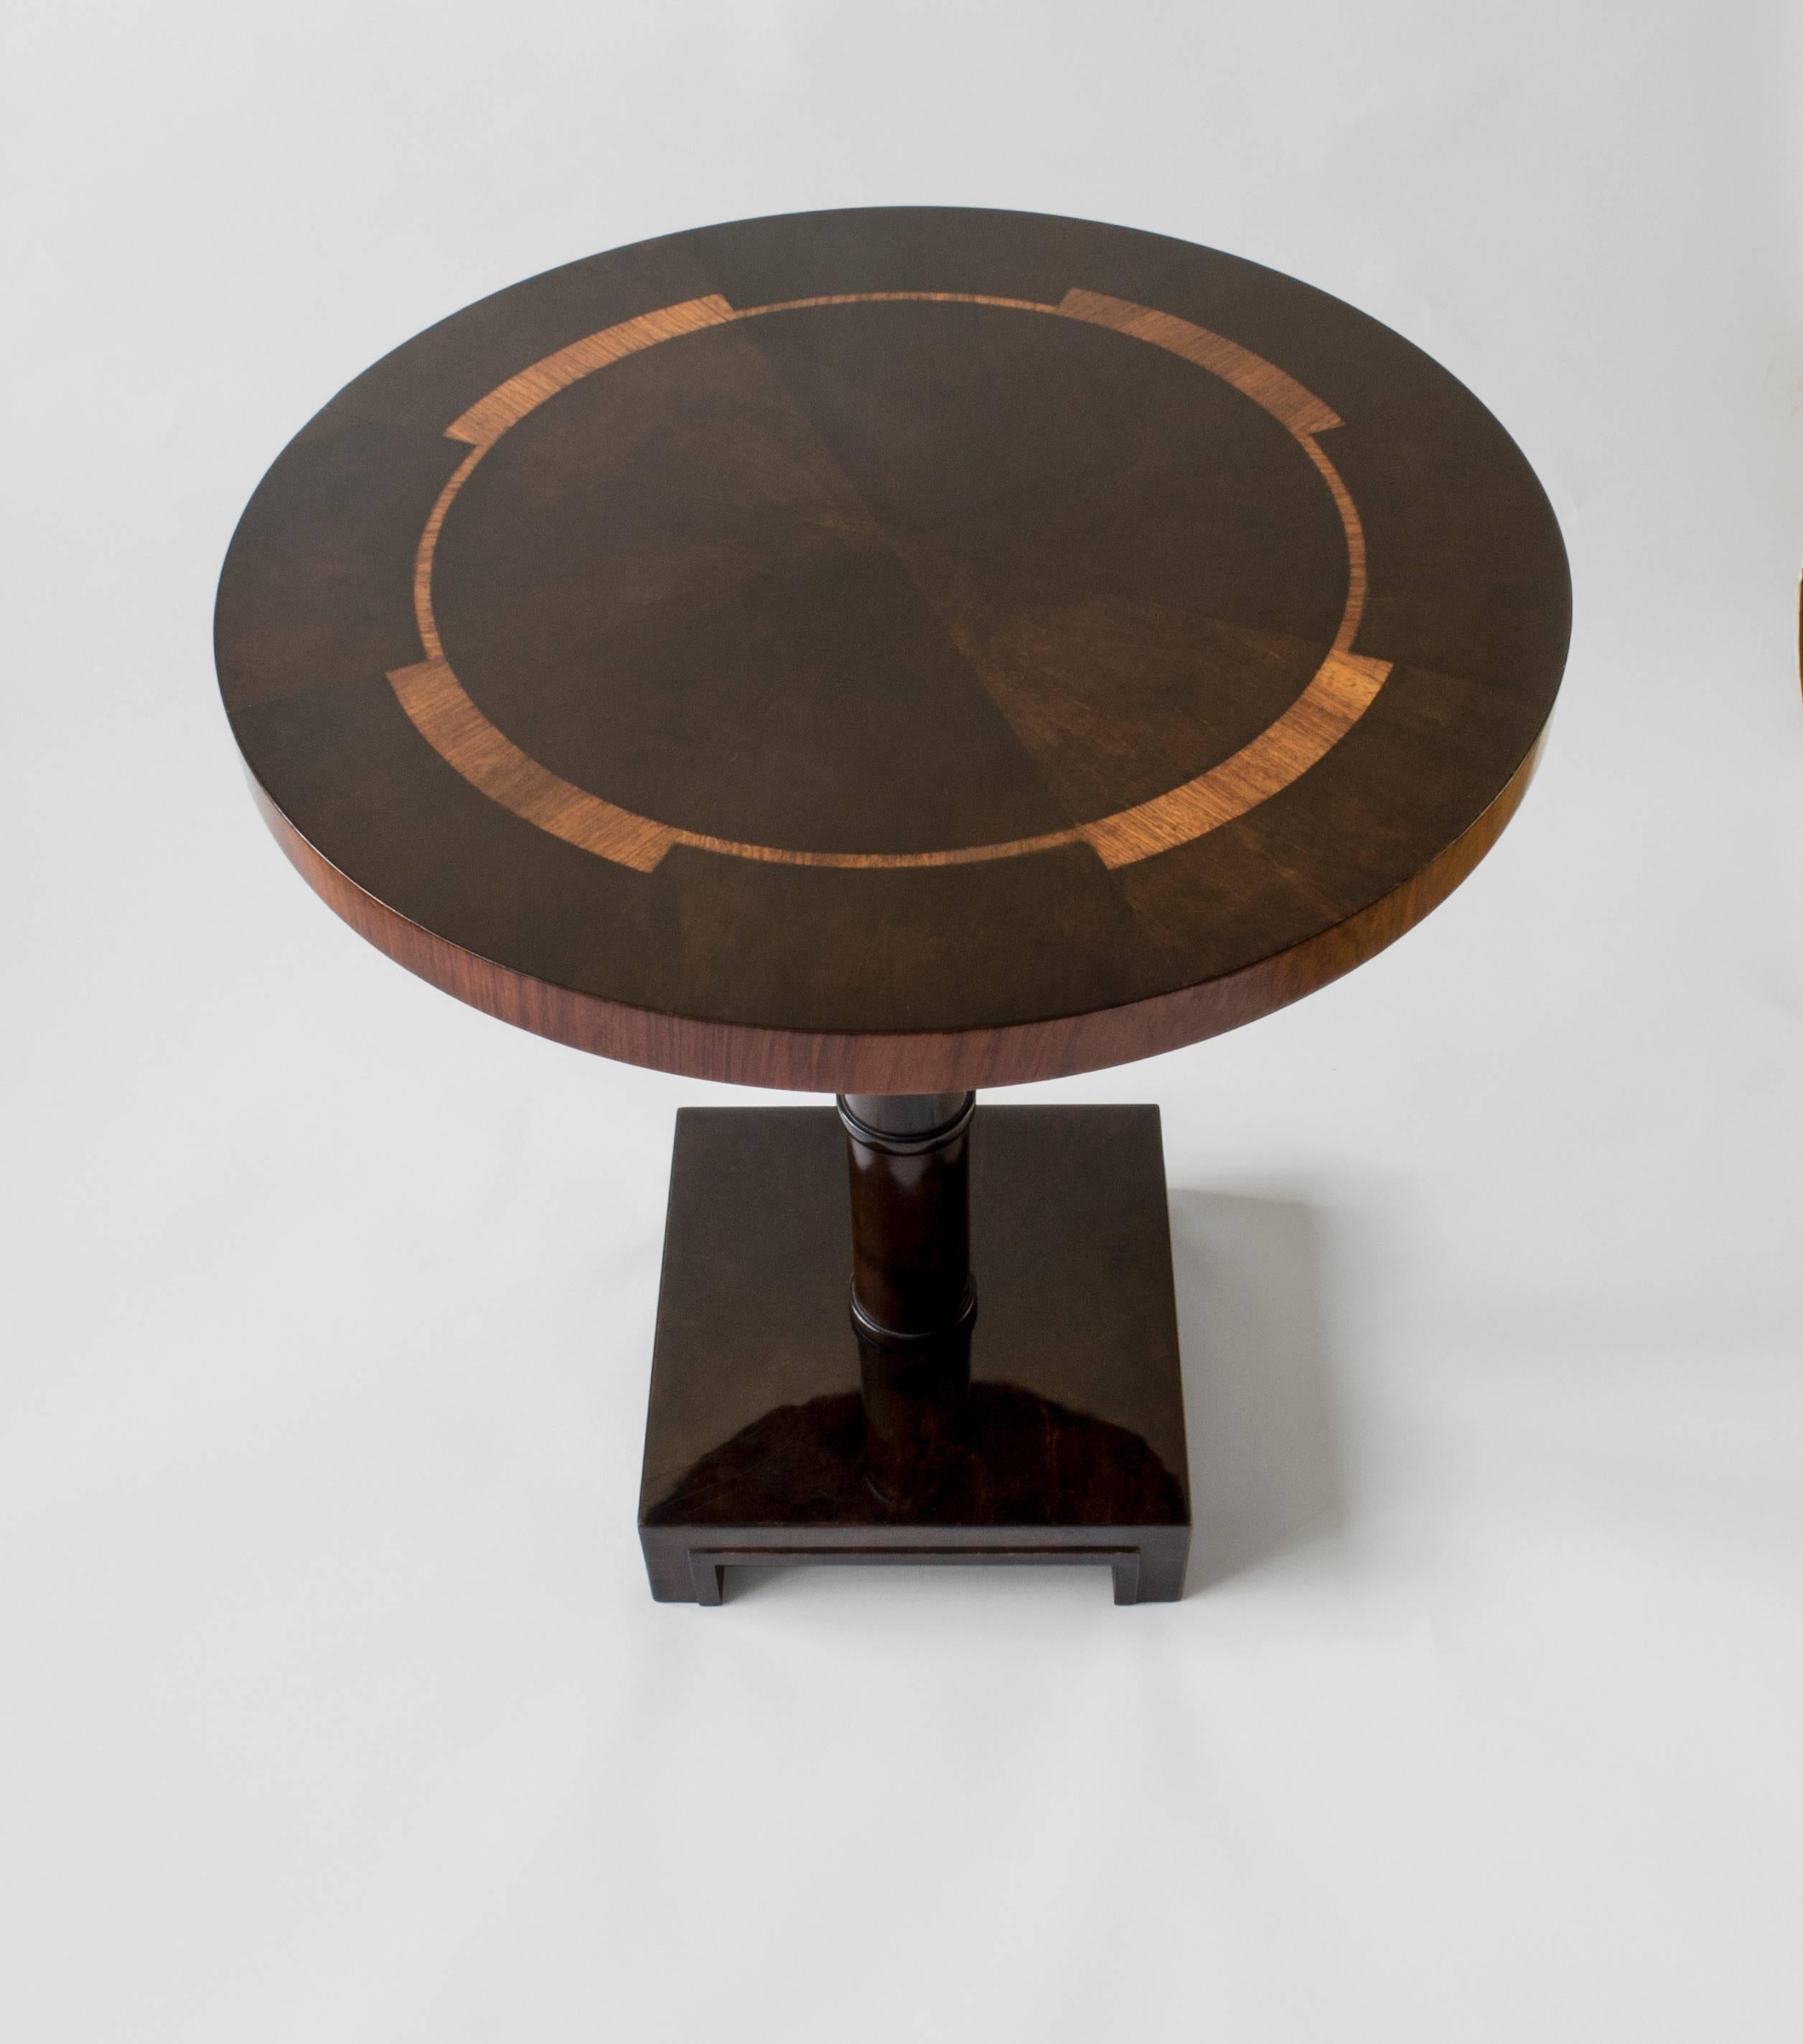 Art Deco Axel Einar Hjorth, Attributed Zebrawood and Birch Small Drinks or Side Table